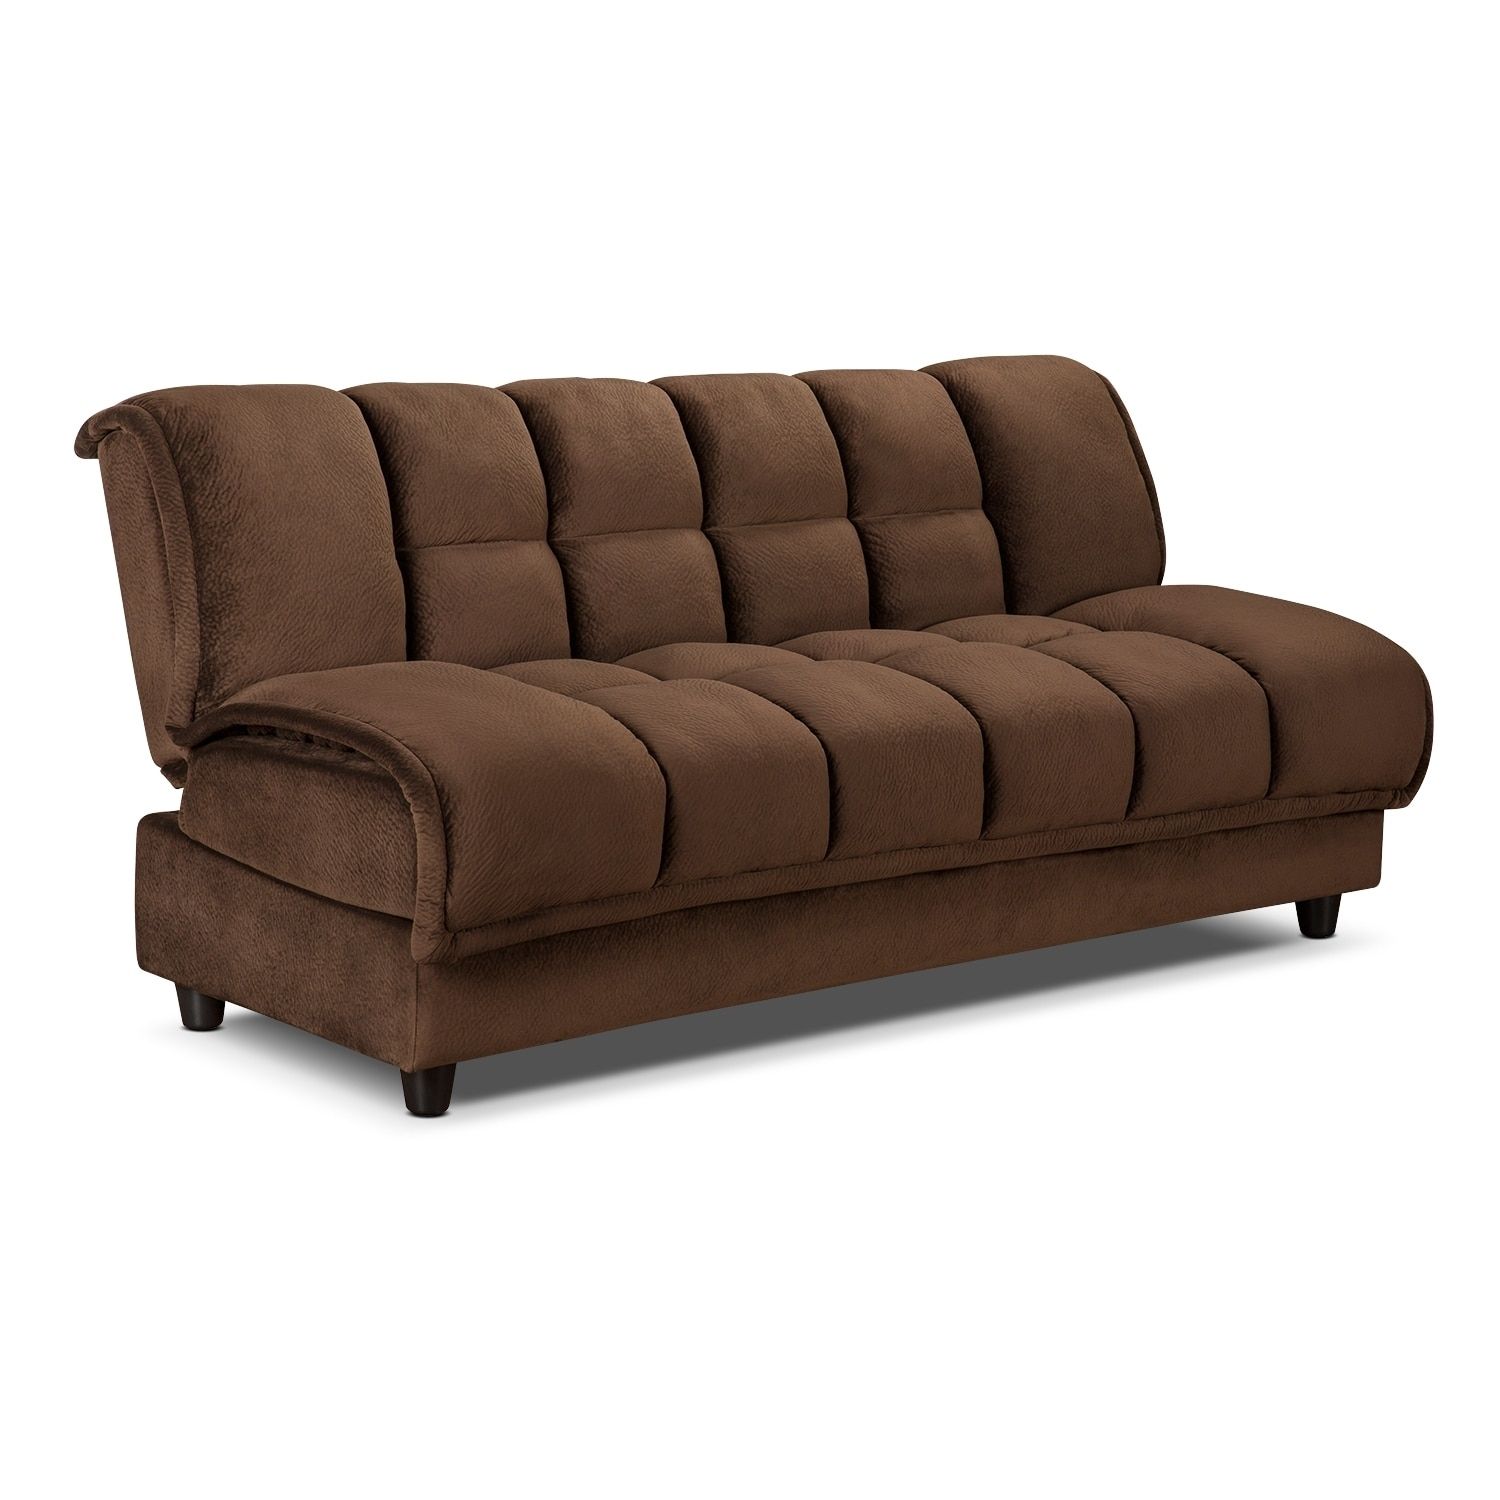 Furniture: Cheap Sectional Sofas Under 300 | Costco Couches Regarding Tallahassee Sectional Sofas (View 5 of 10)